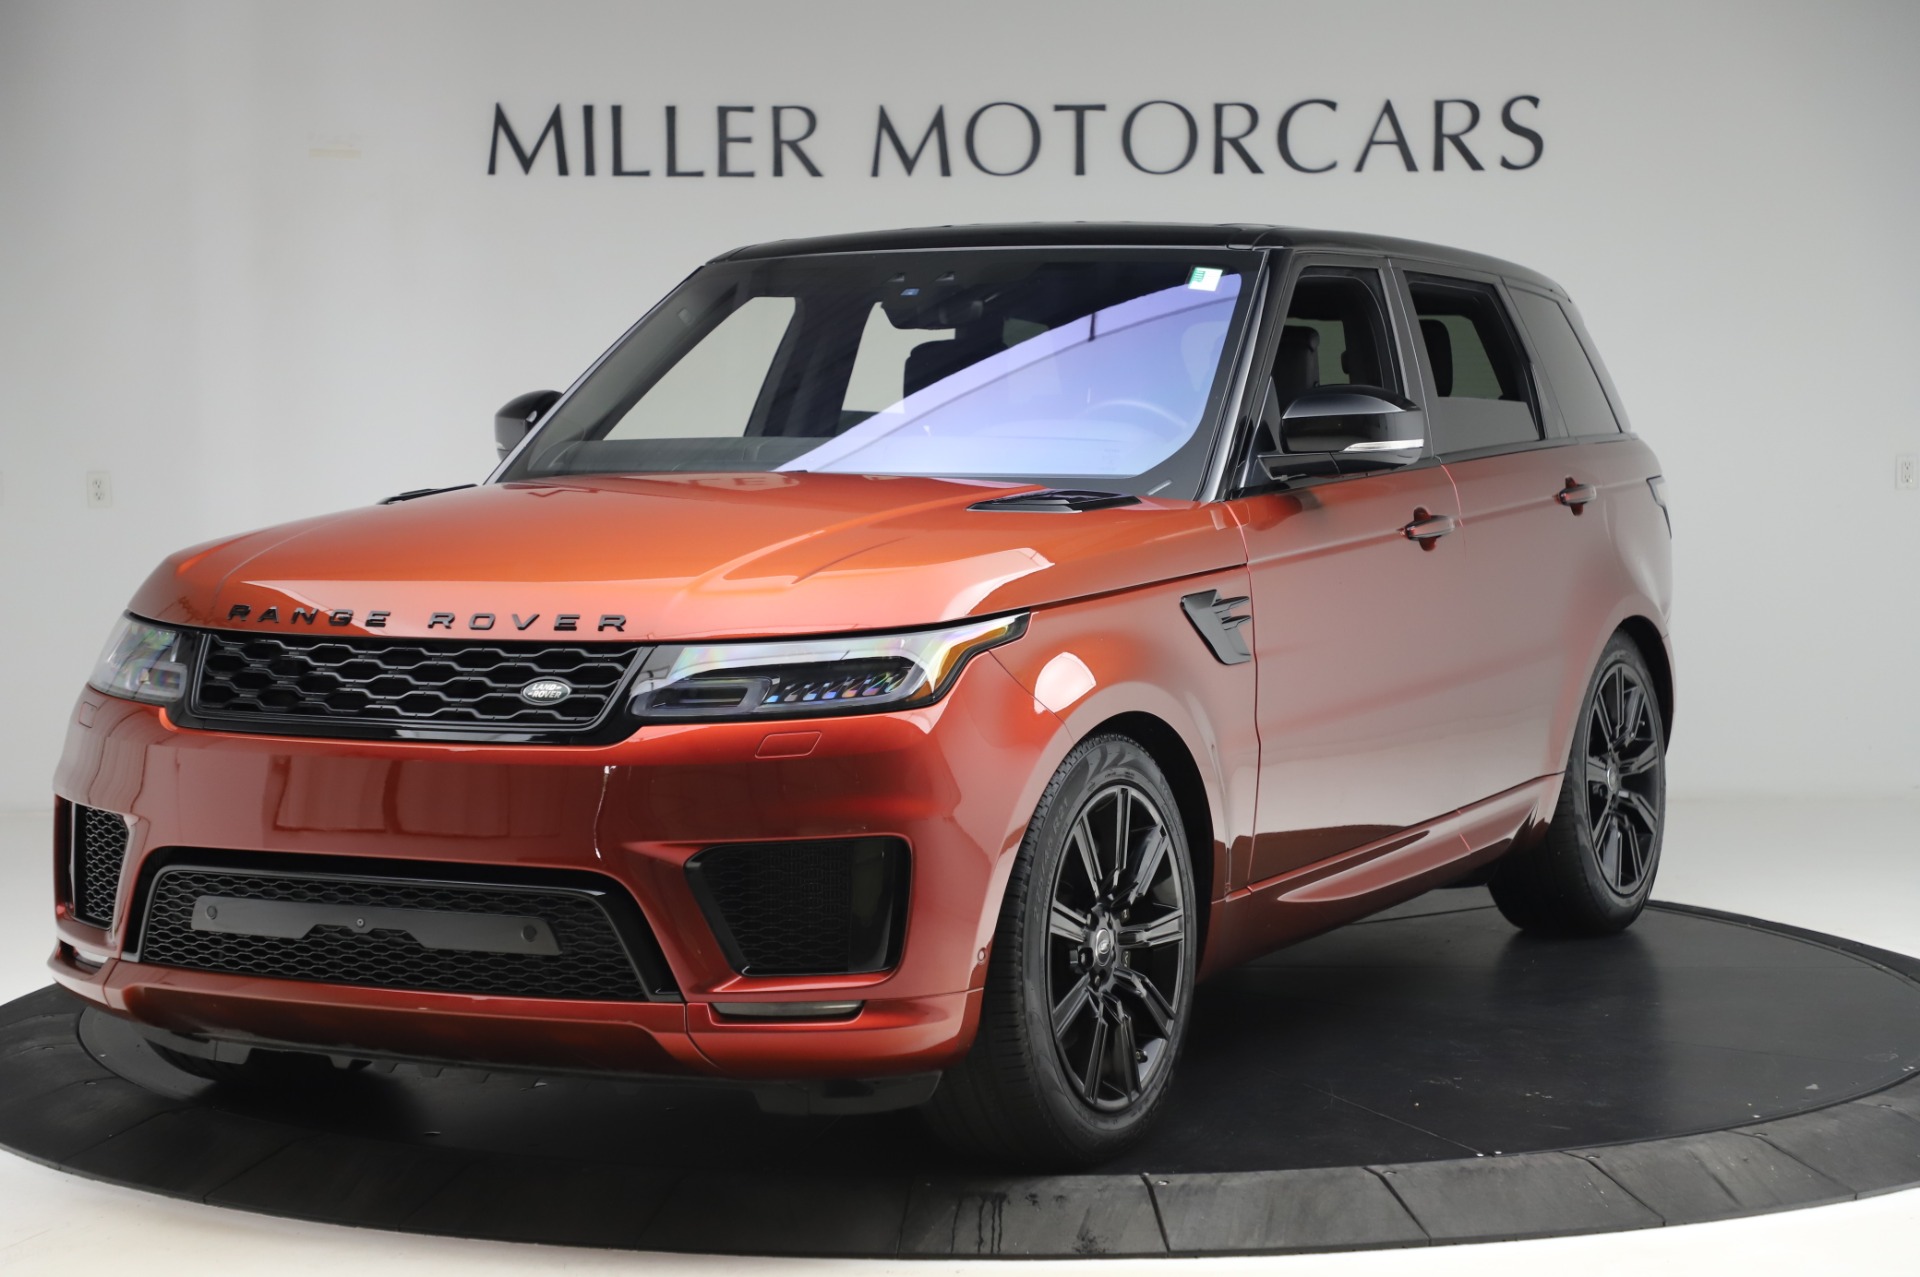 Used 2019 Land Rover Range Rover Sport Autobiography for sale Sold at Aston Martin of Greenwich in Greenwich CT 06830 1